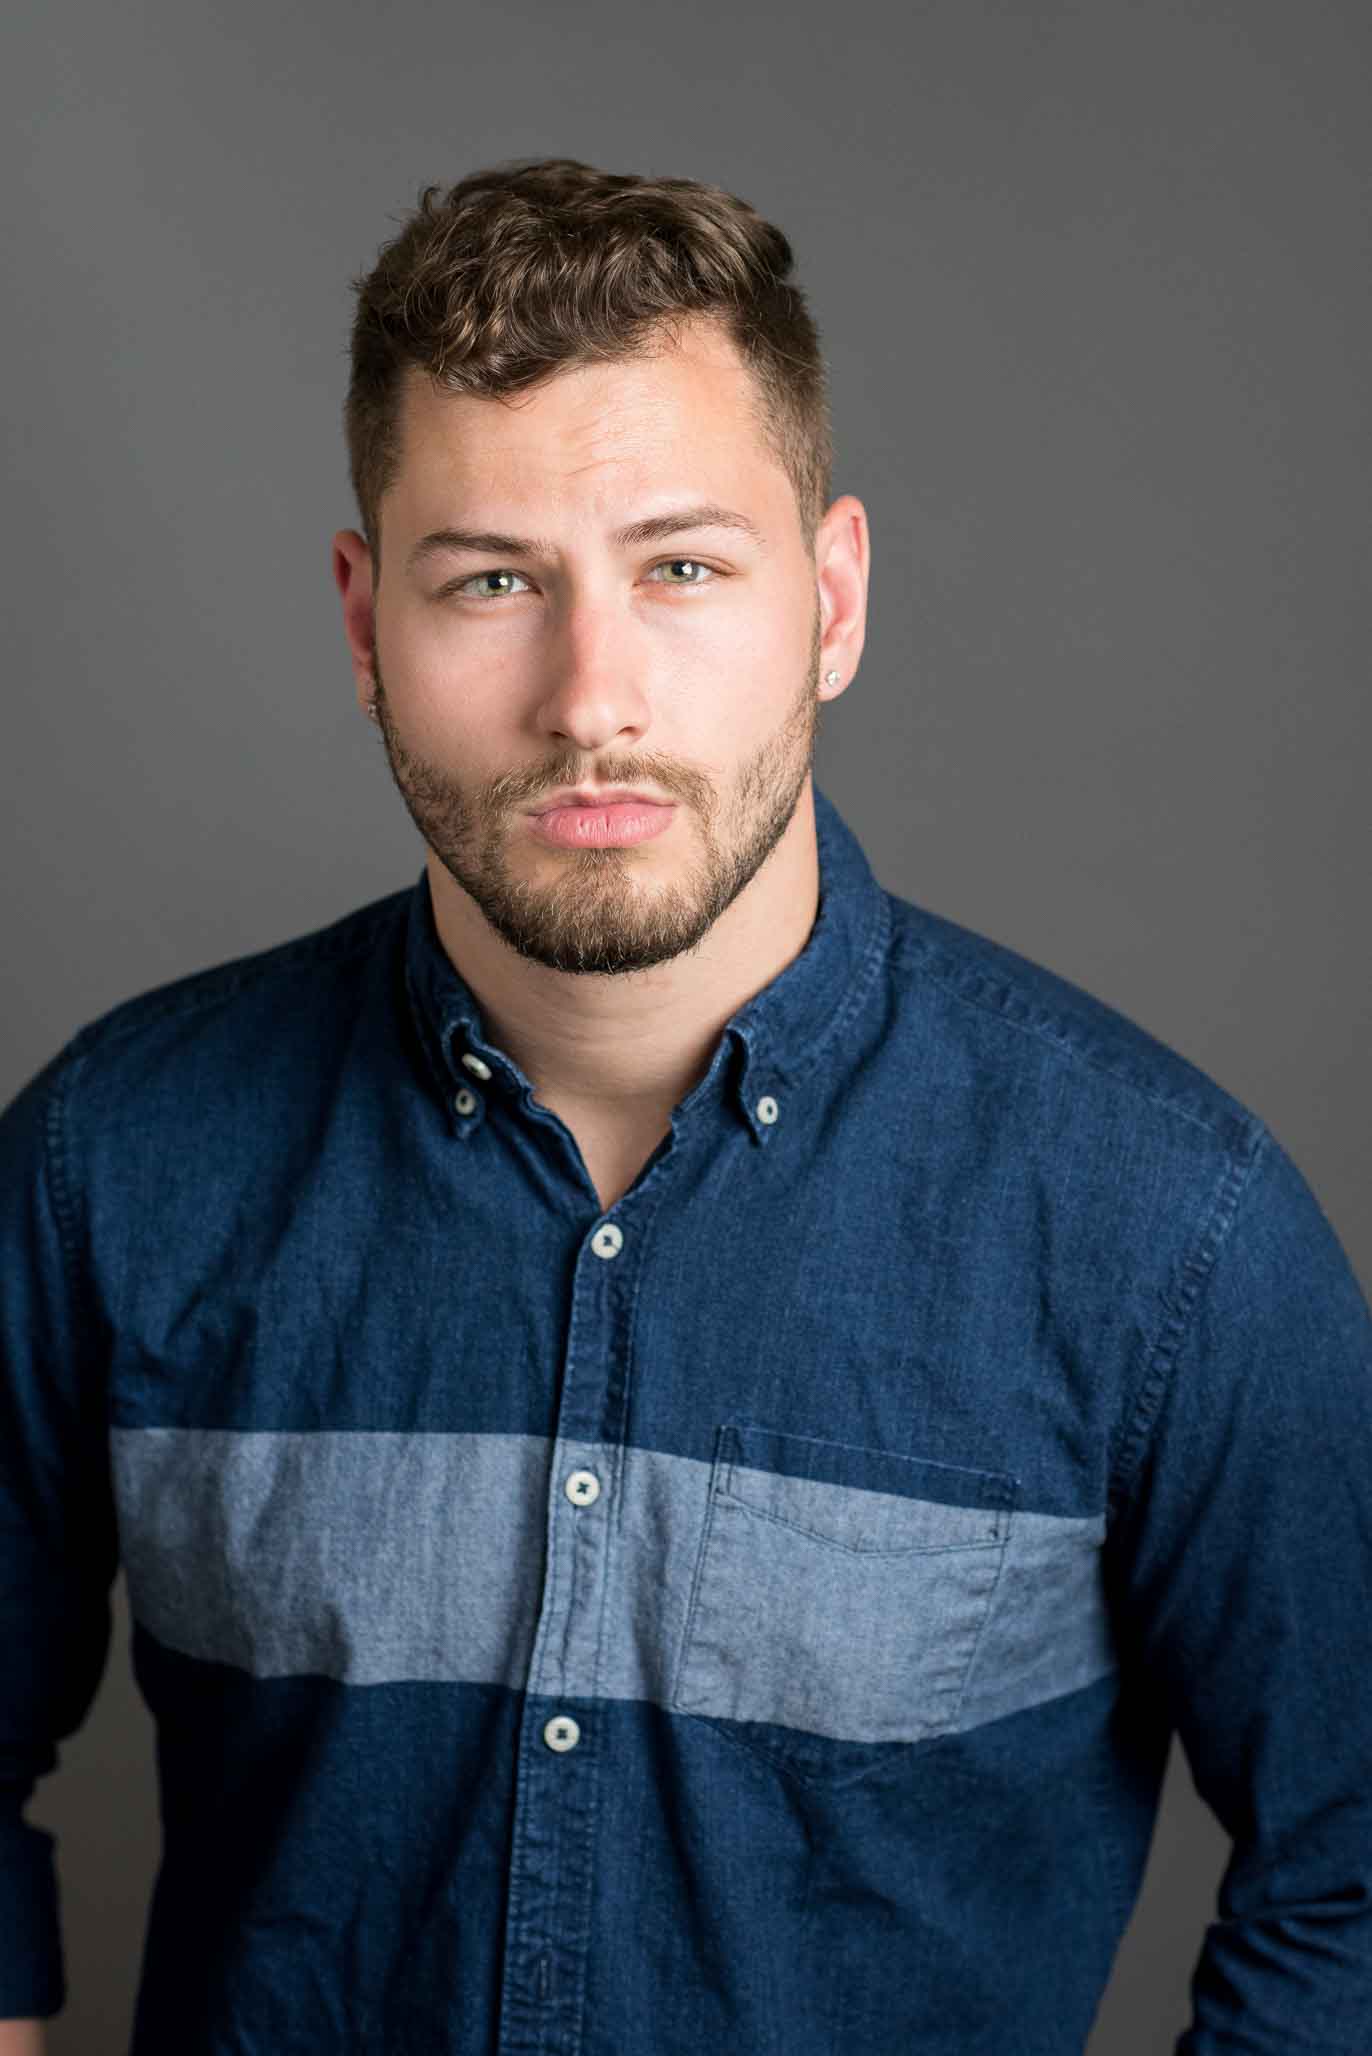 promotional headshot of male actor wearing a denim button up shirt.